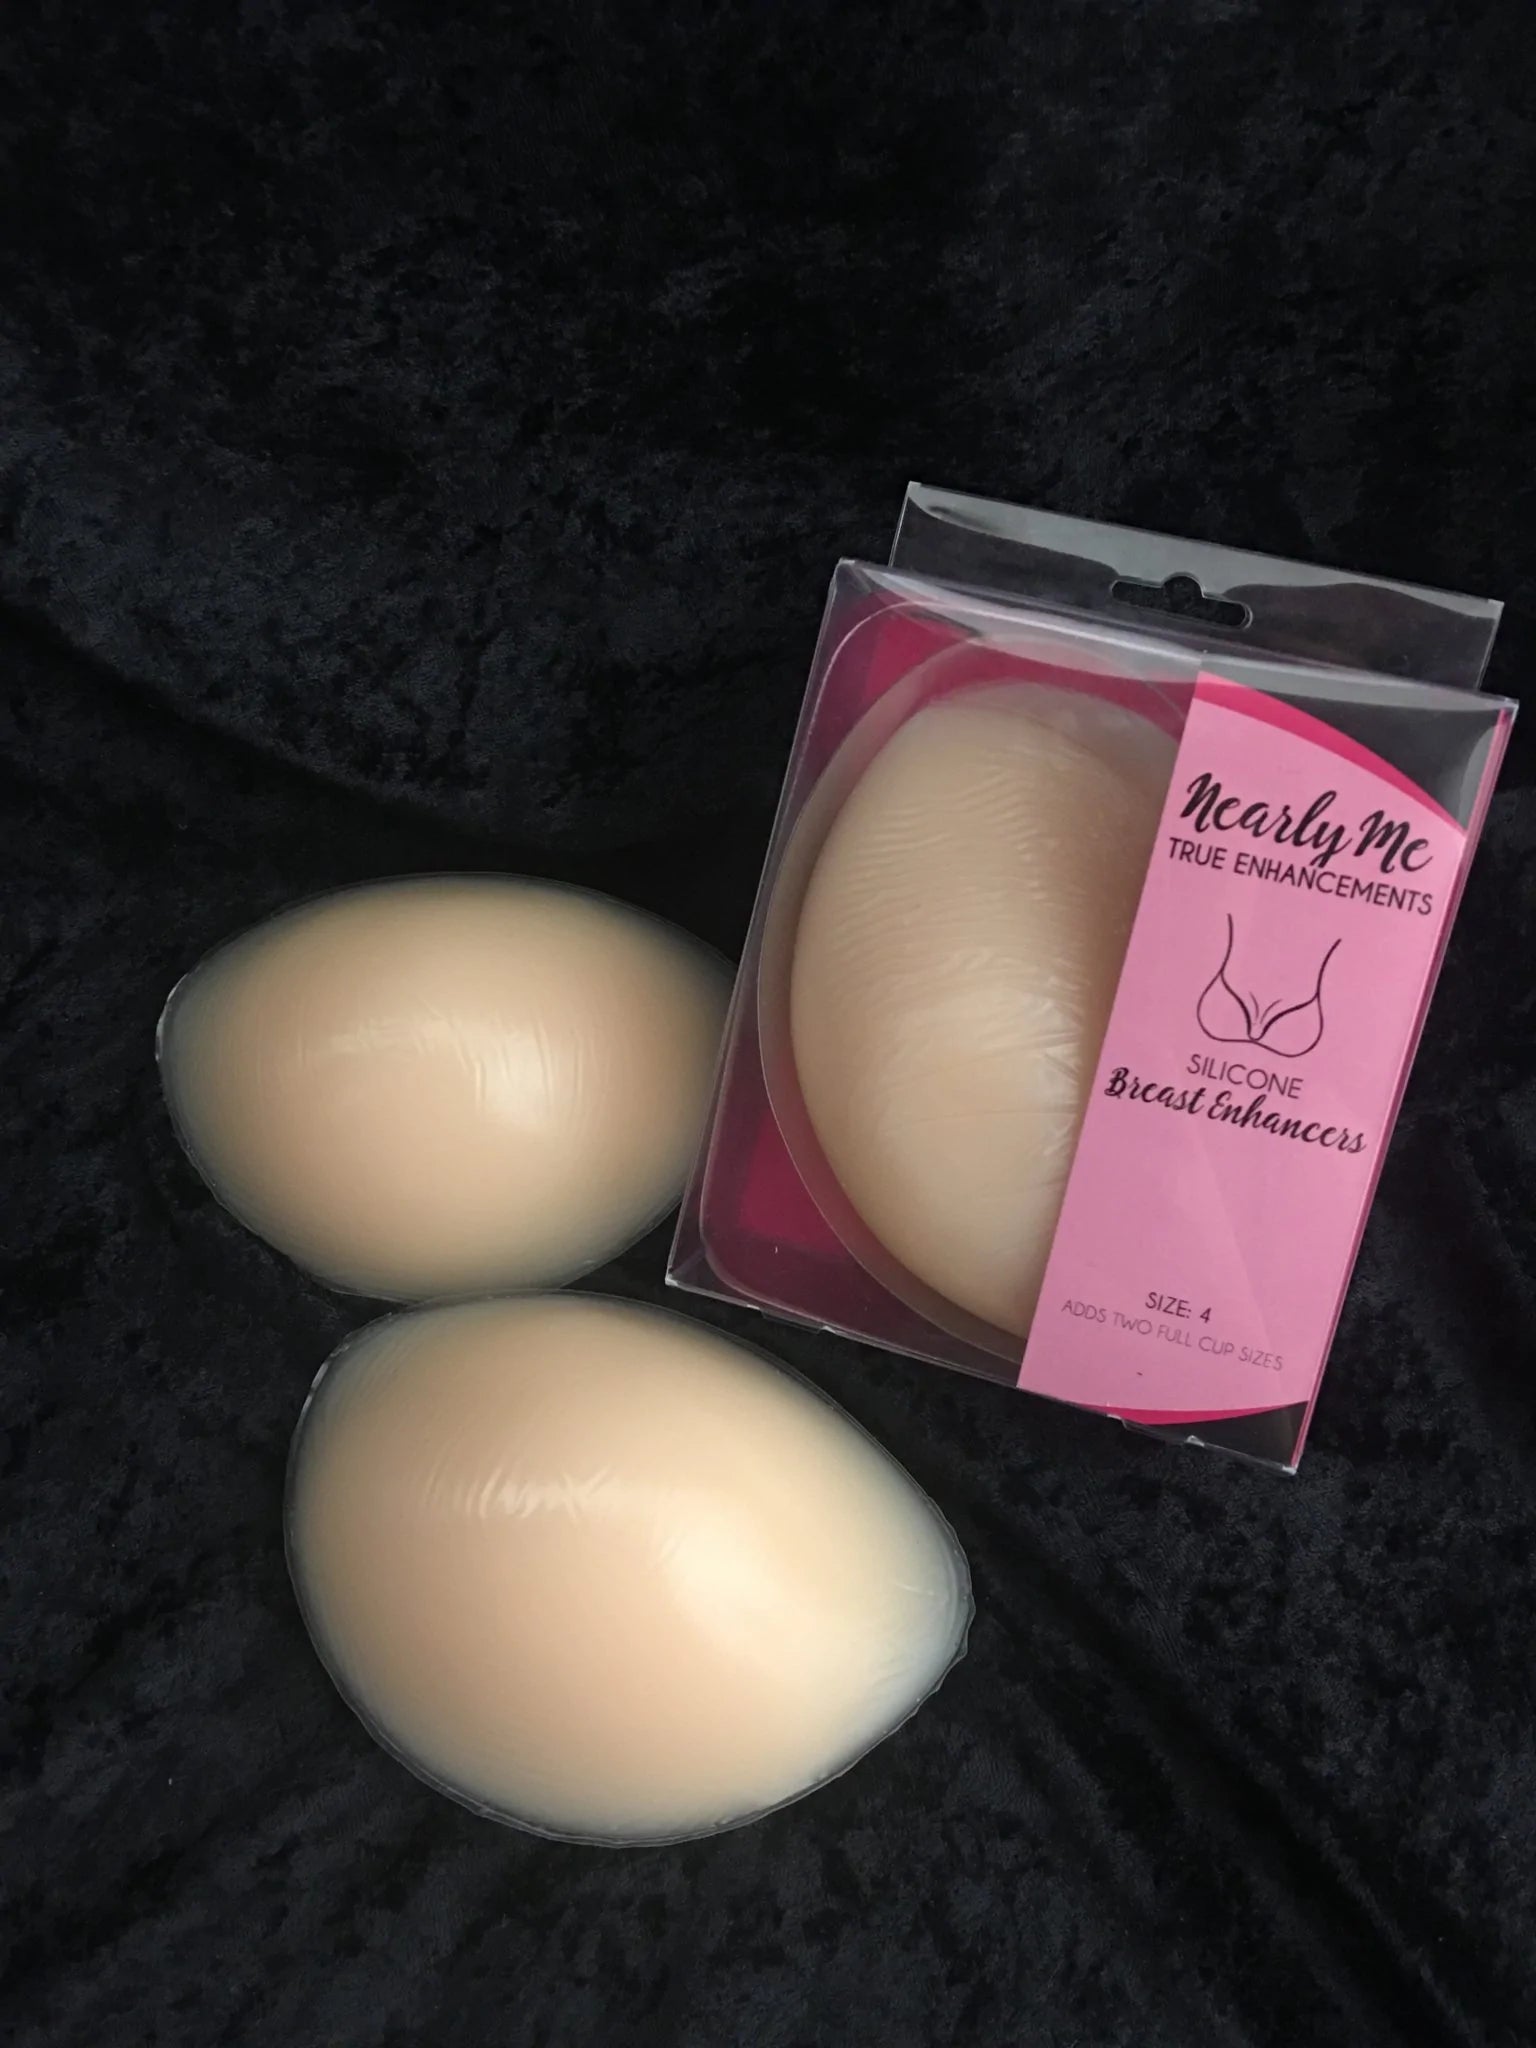  Nearly Me Silicone Bra Push Up Inserts Breast